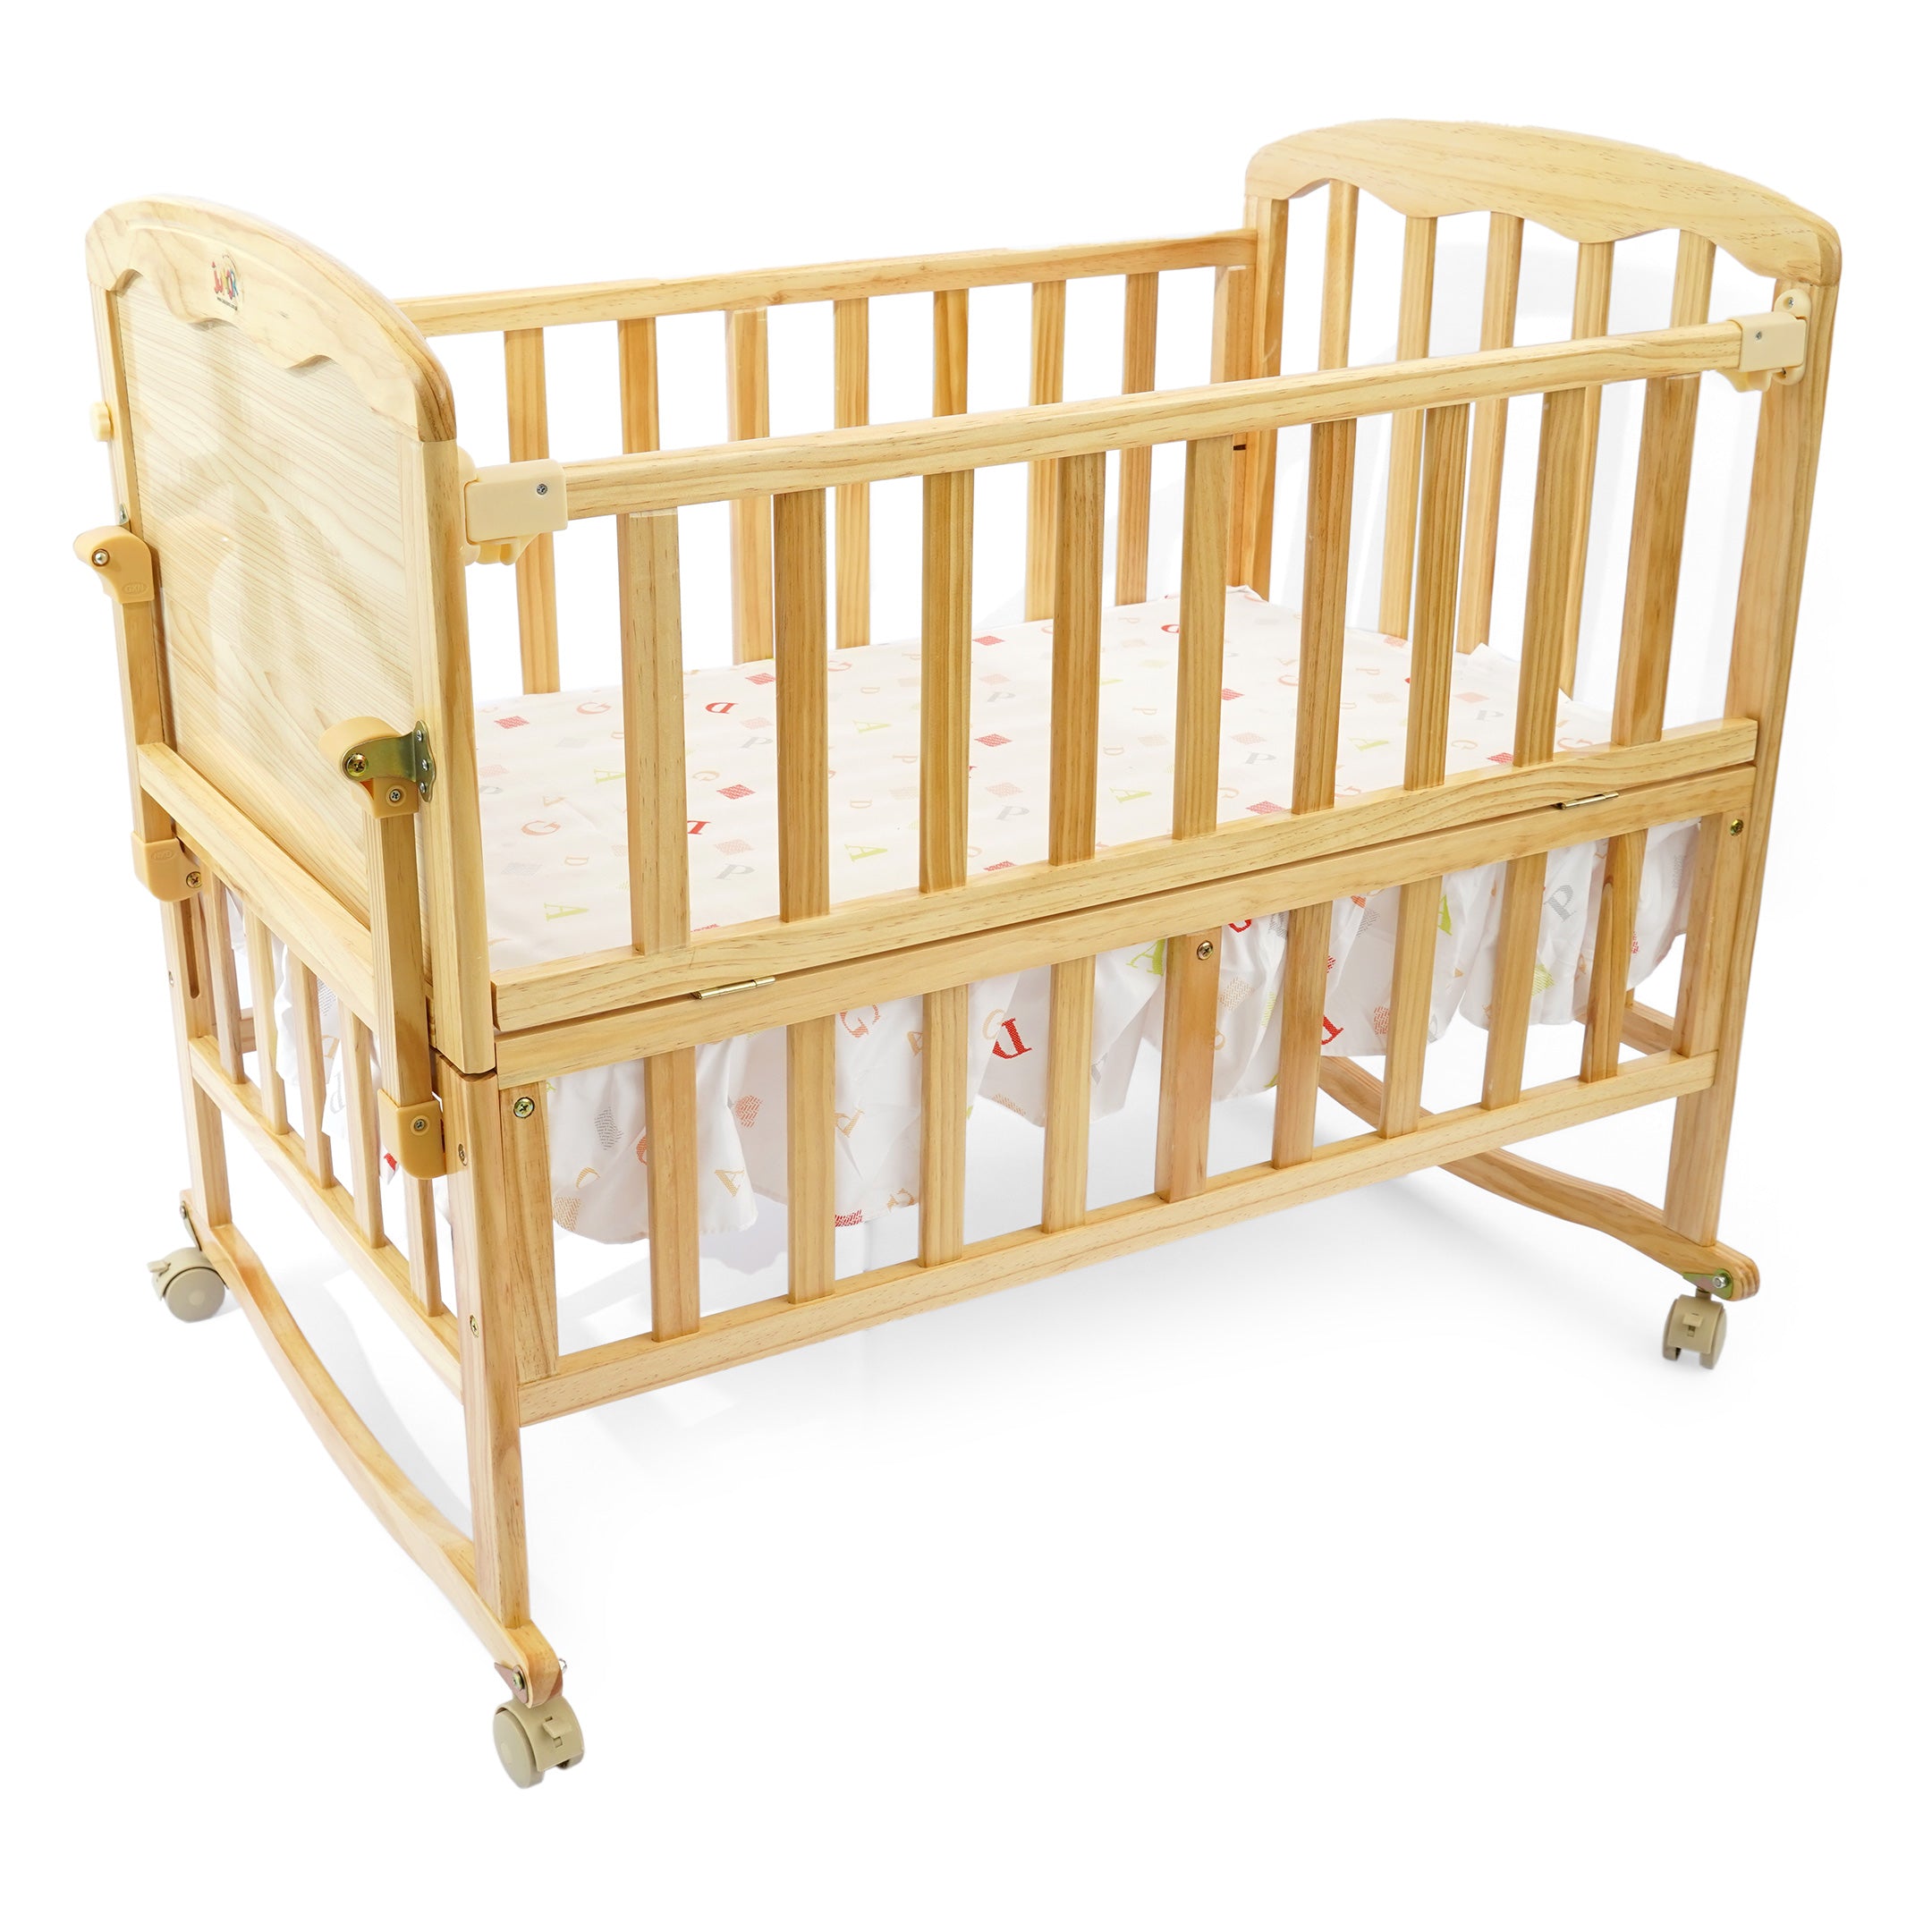 Brown Wooden Baby Cot with Wheels